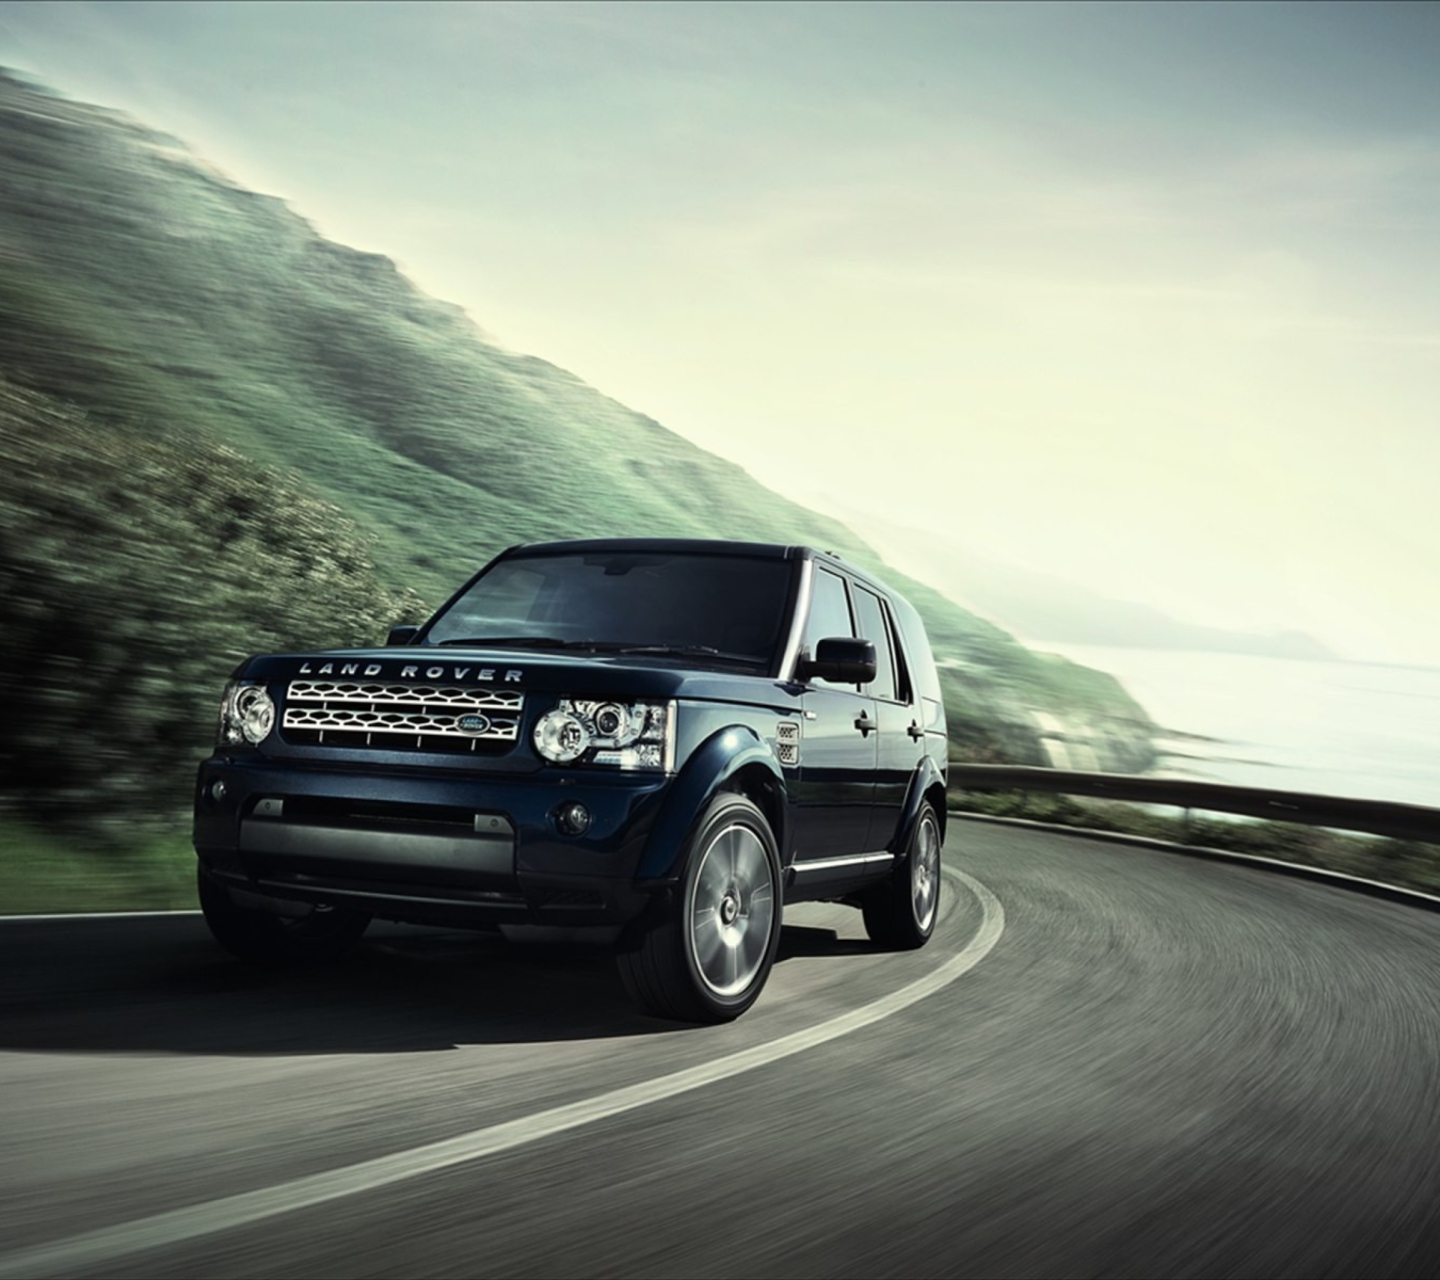 Land Rover Discovery 4 wallpaper 1440x1280